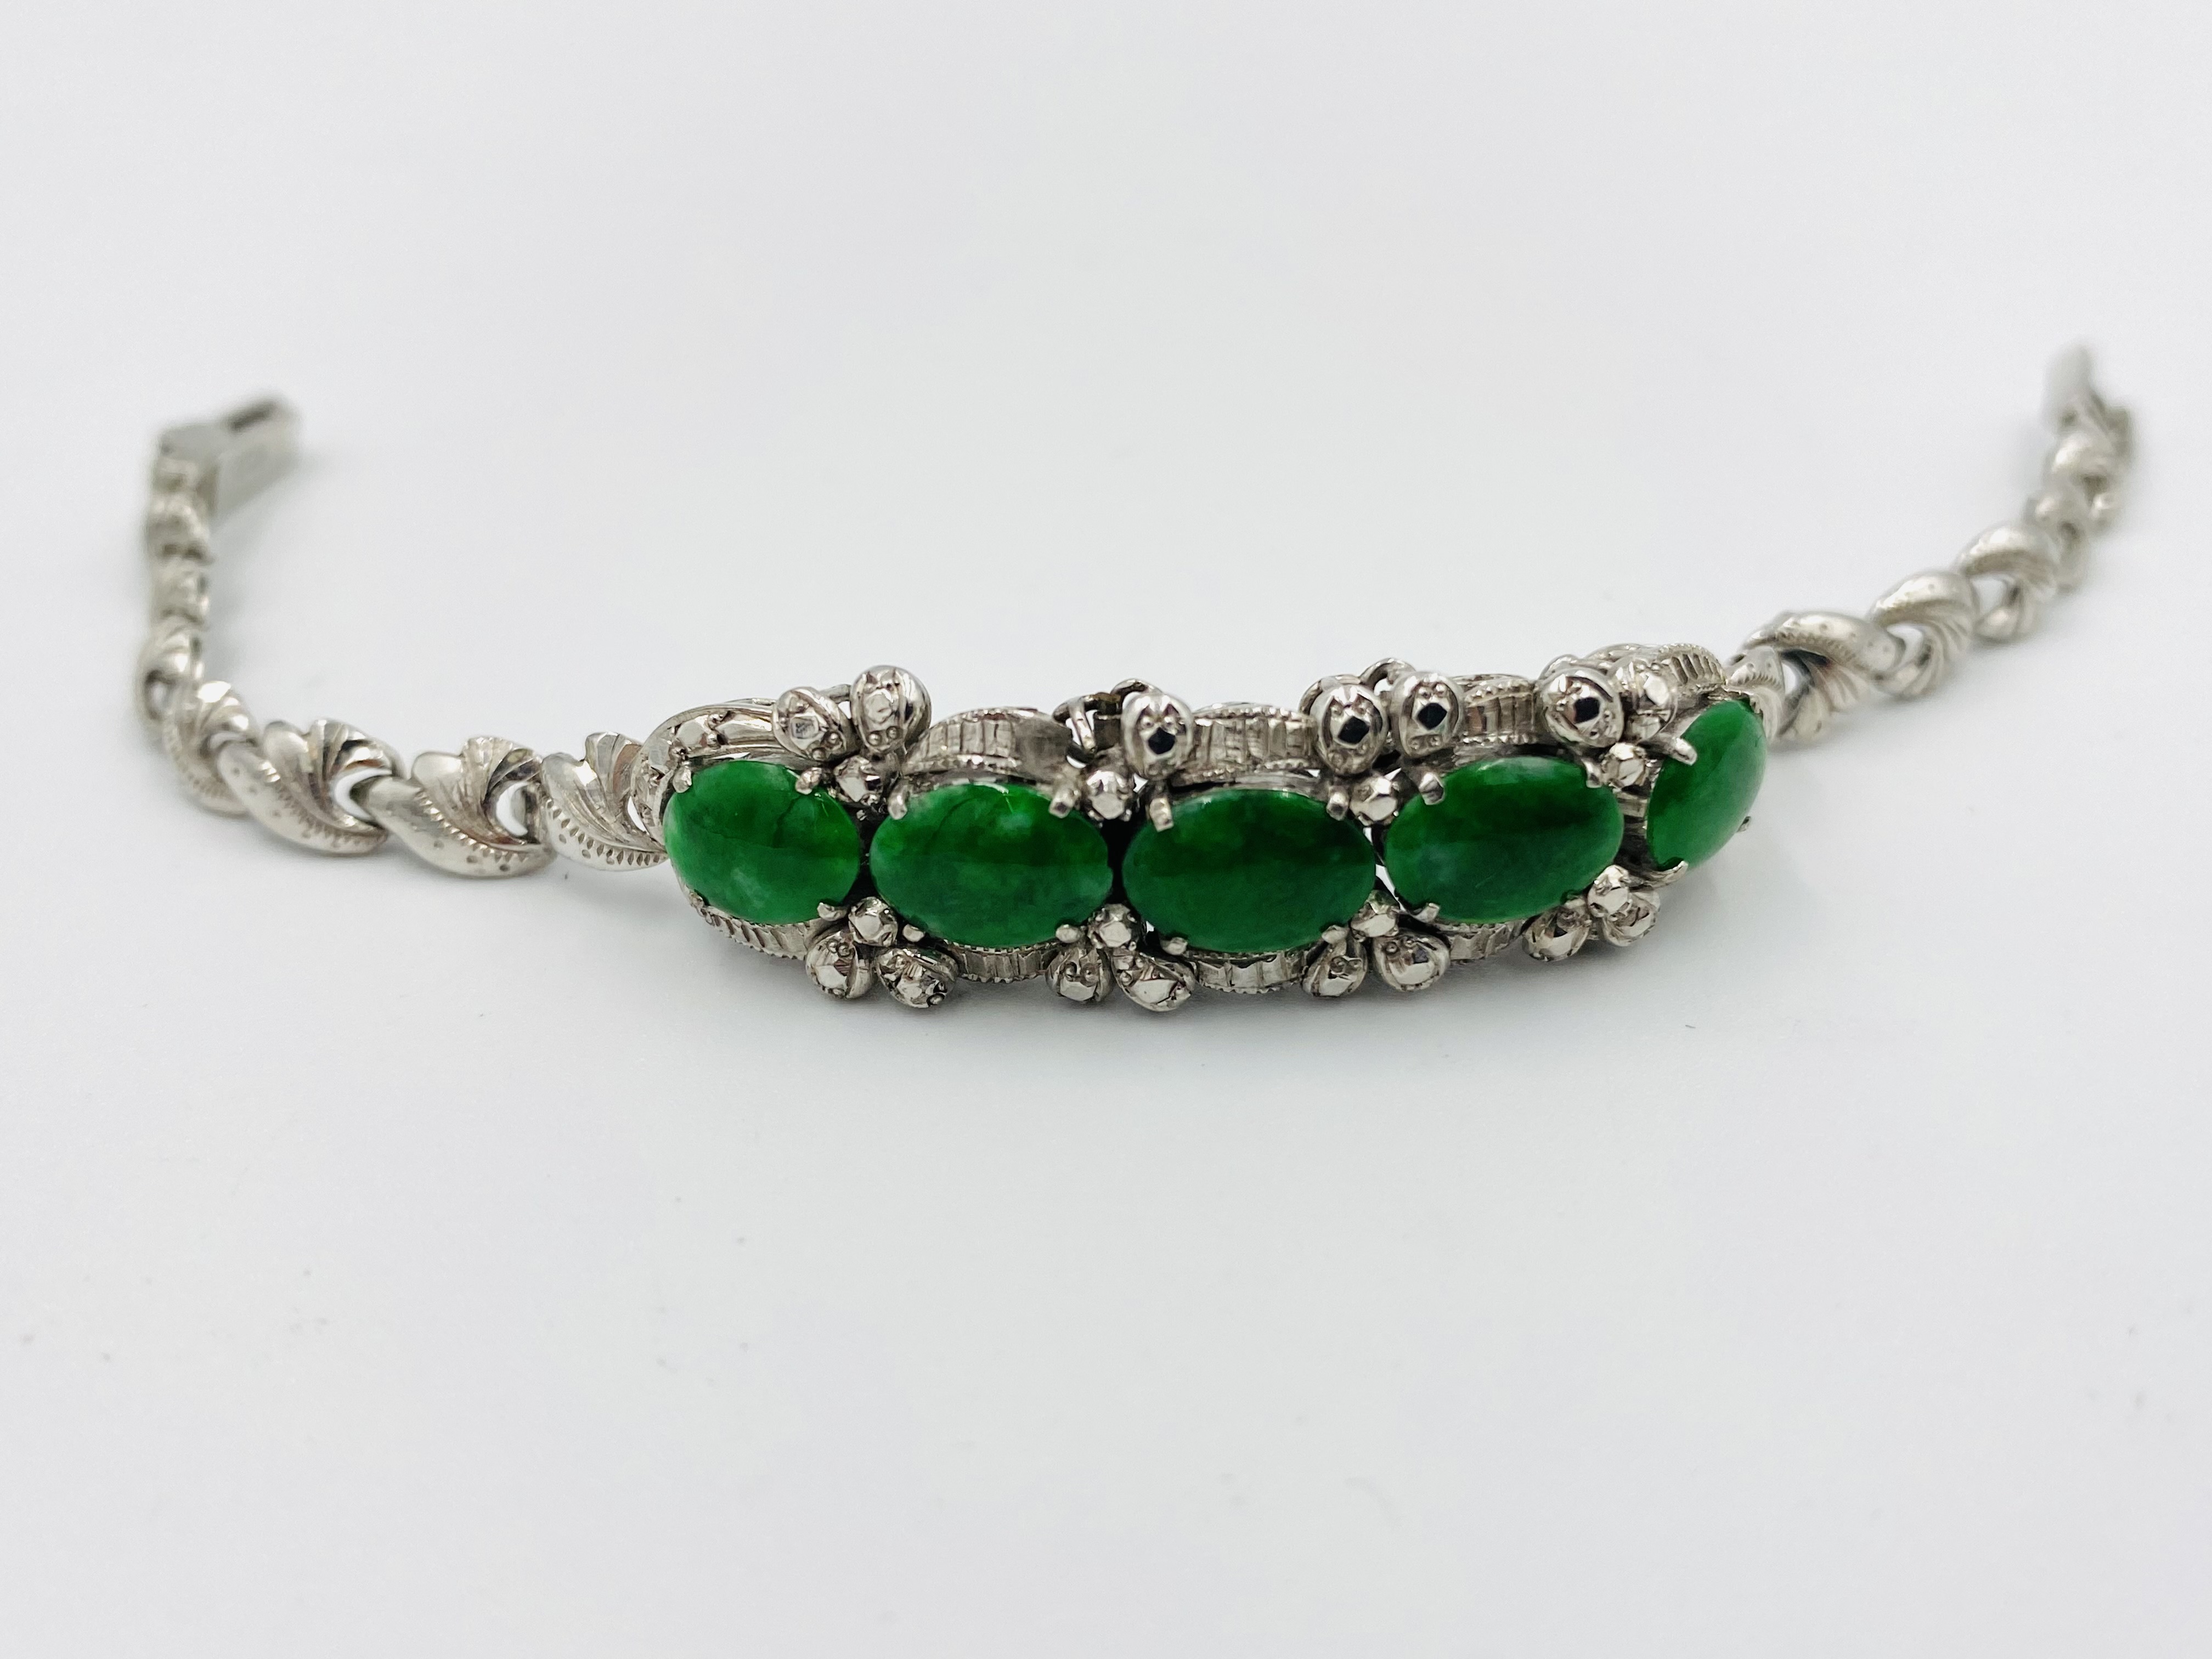 14ct white gold and jade bracelet - Image 2 of 5